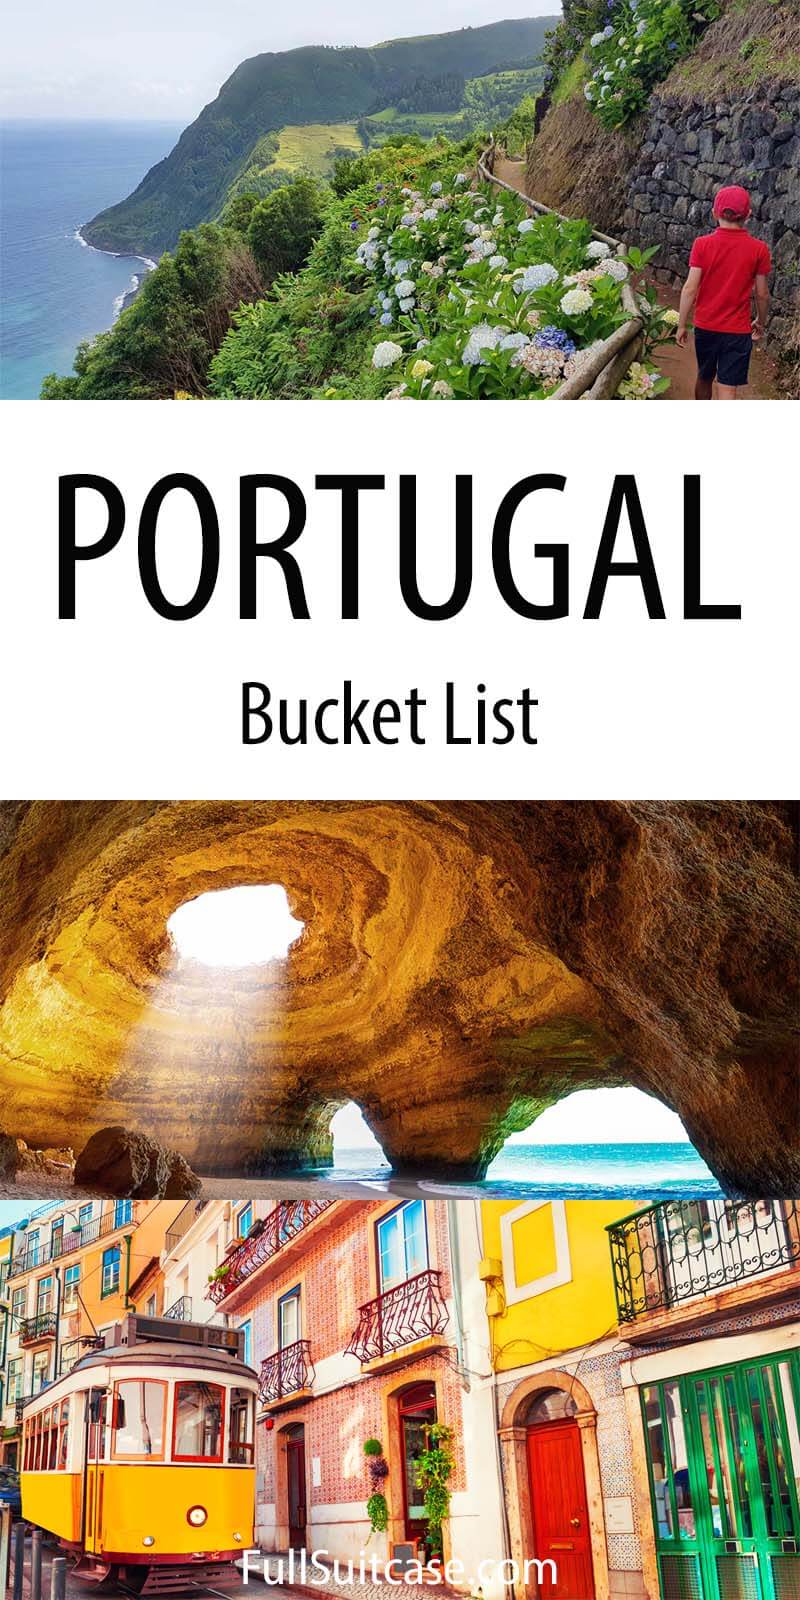 Portugal bucket list experiences and top things to do for first time visitors